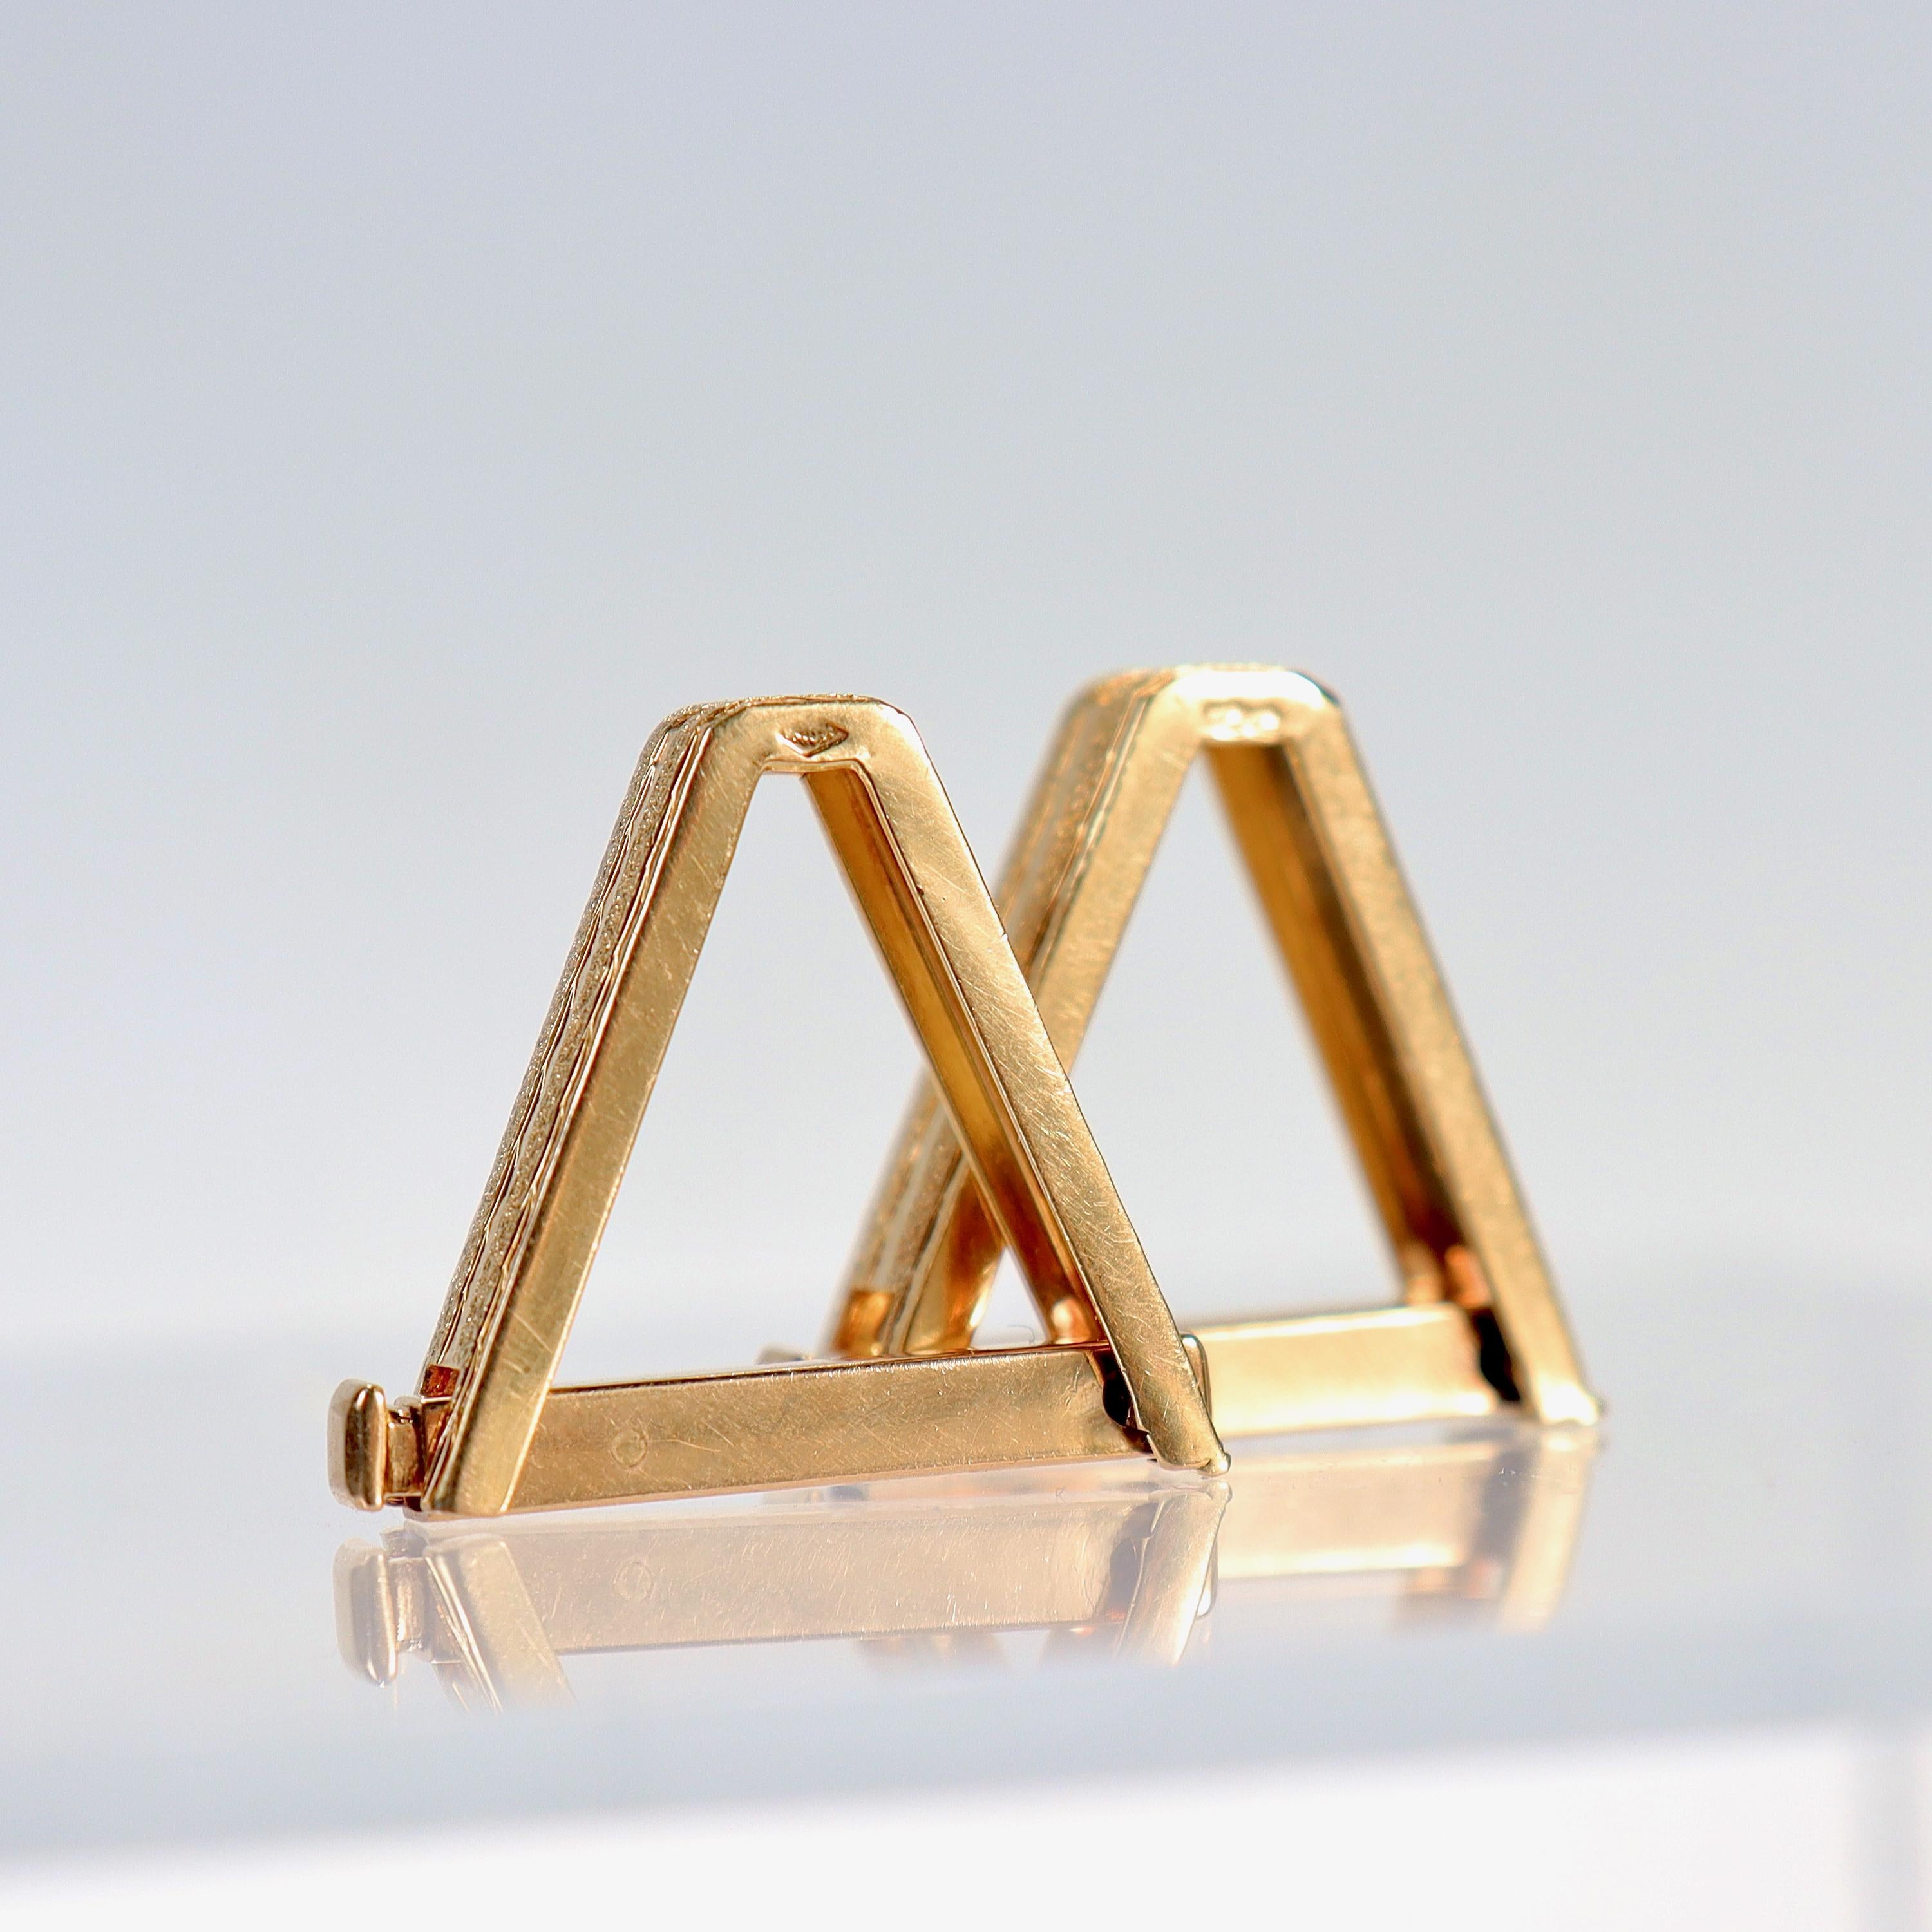 Signed 18 Karat French Gold Triangular or Wrapped Cufflinks For Sale 4